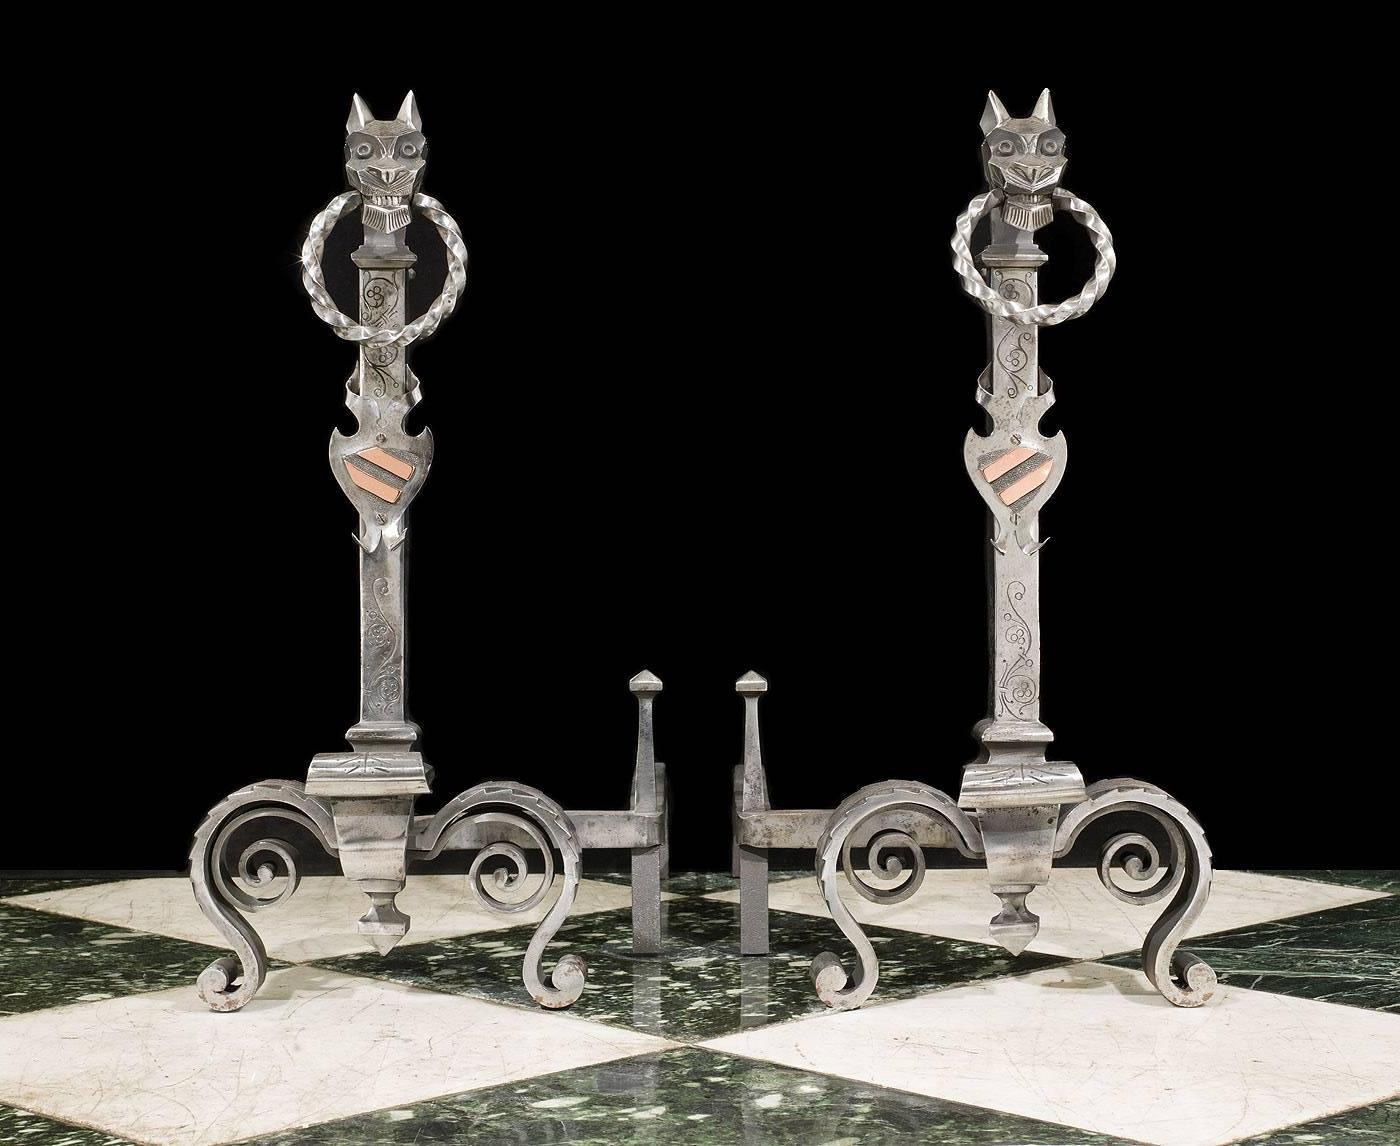 A pair of tall Gothic style wrought iron andirons. The florally etched standards,
topped by a pair of wolf heads holding rings in their mouths above stylized
shields, are supported on foliate decorated scrolled and splayed feet.
Swan's nest